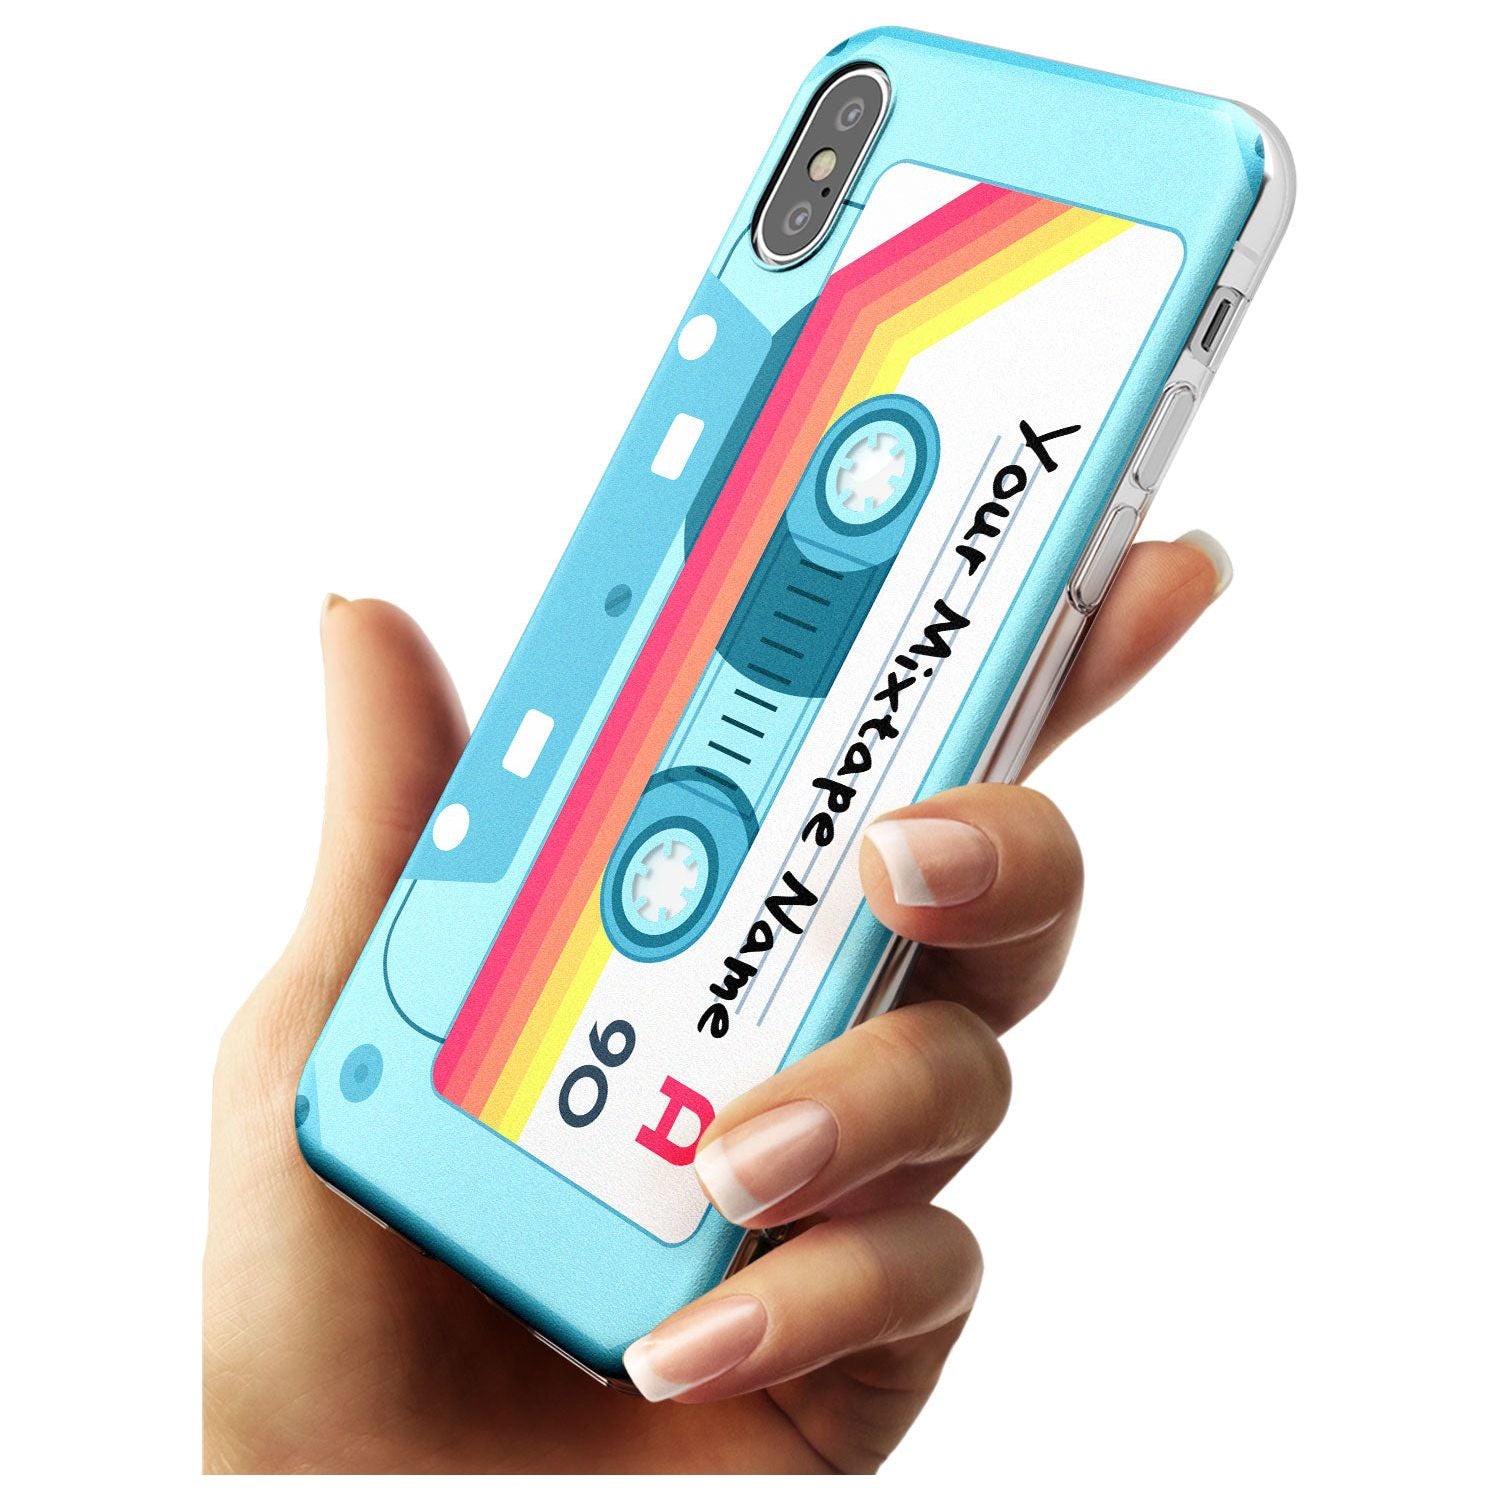 Sporty Cassette Black Impact Phone Case for iPhone X XS Max XR